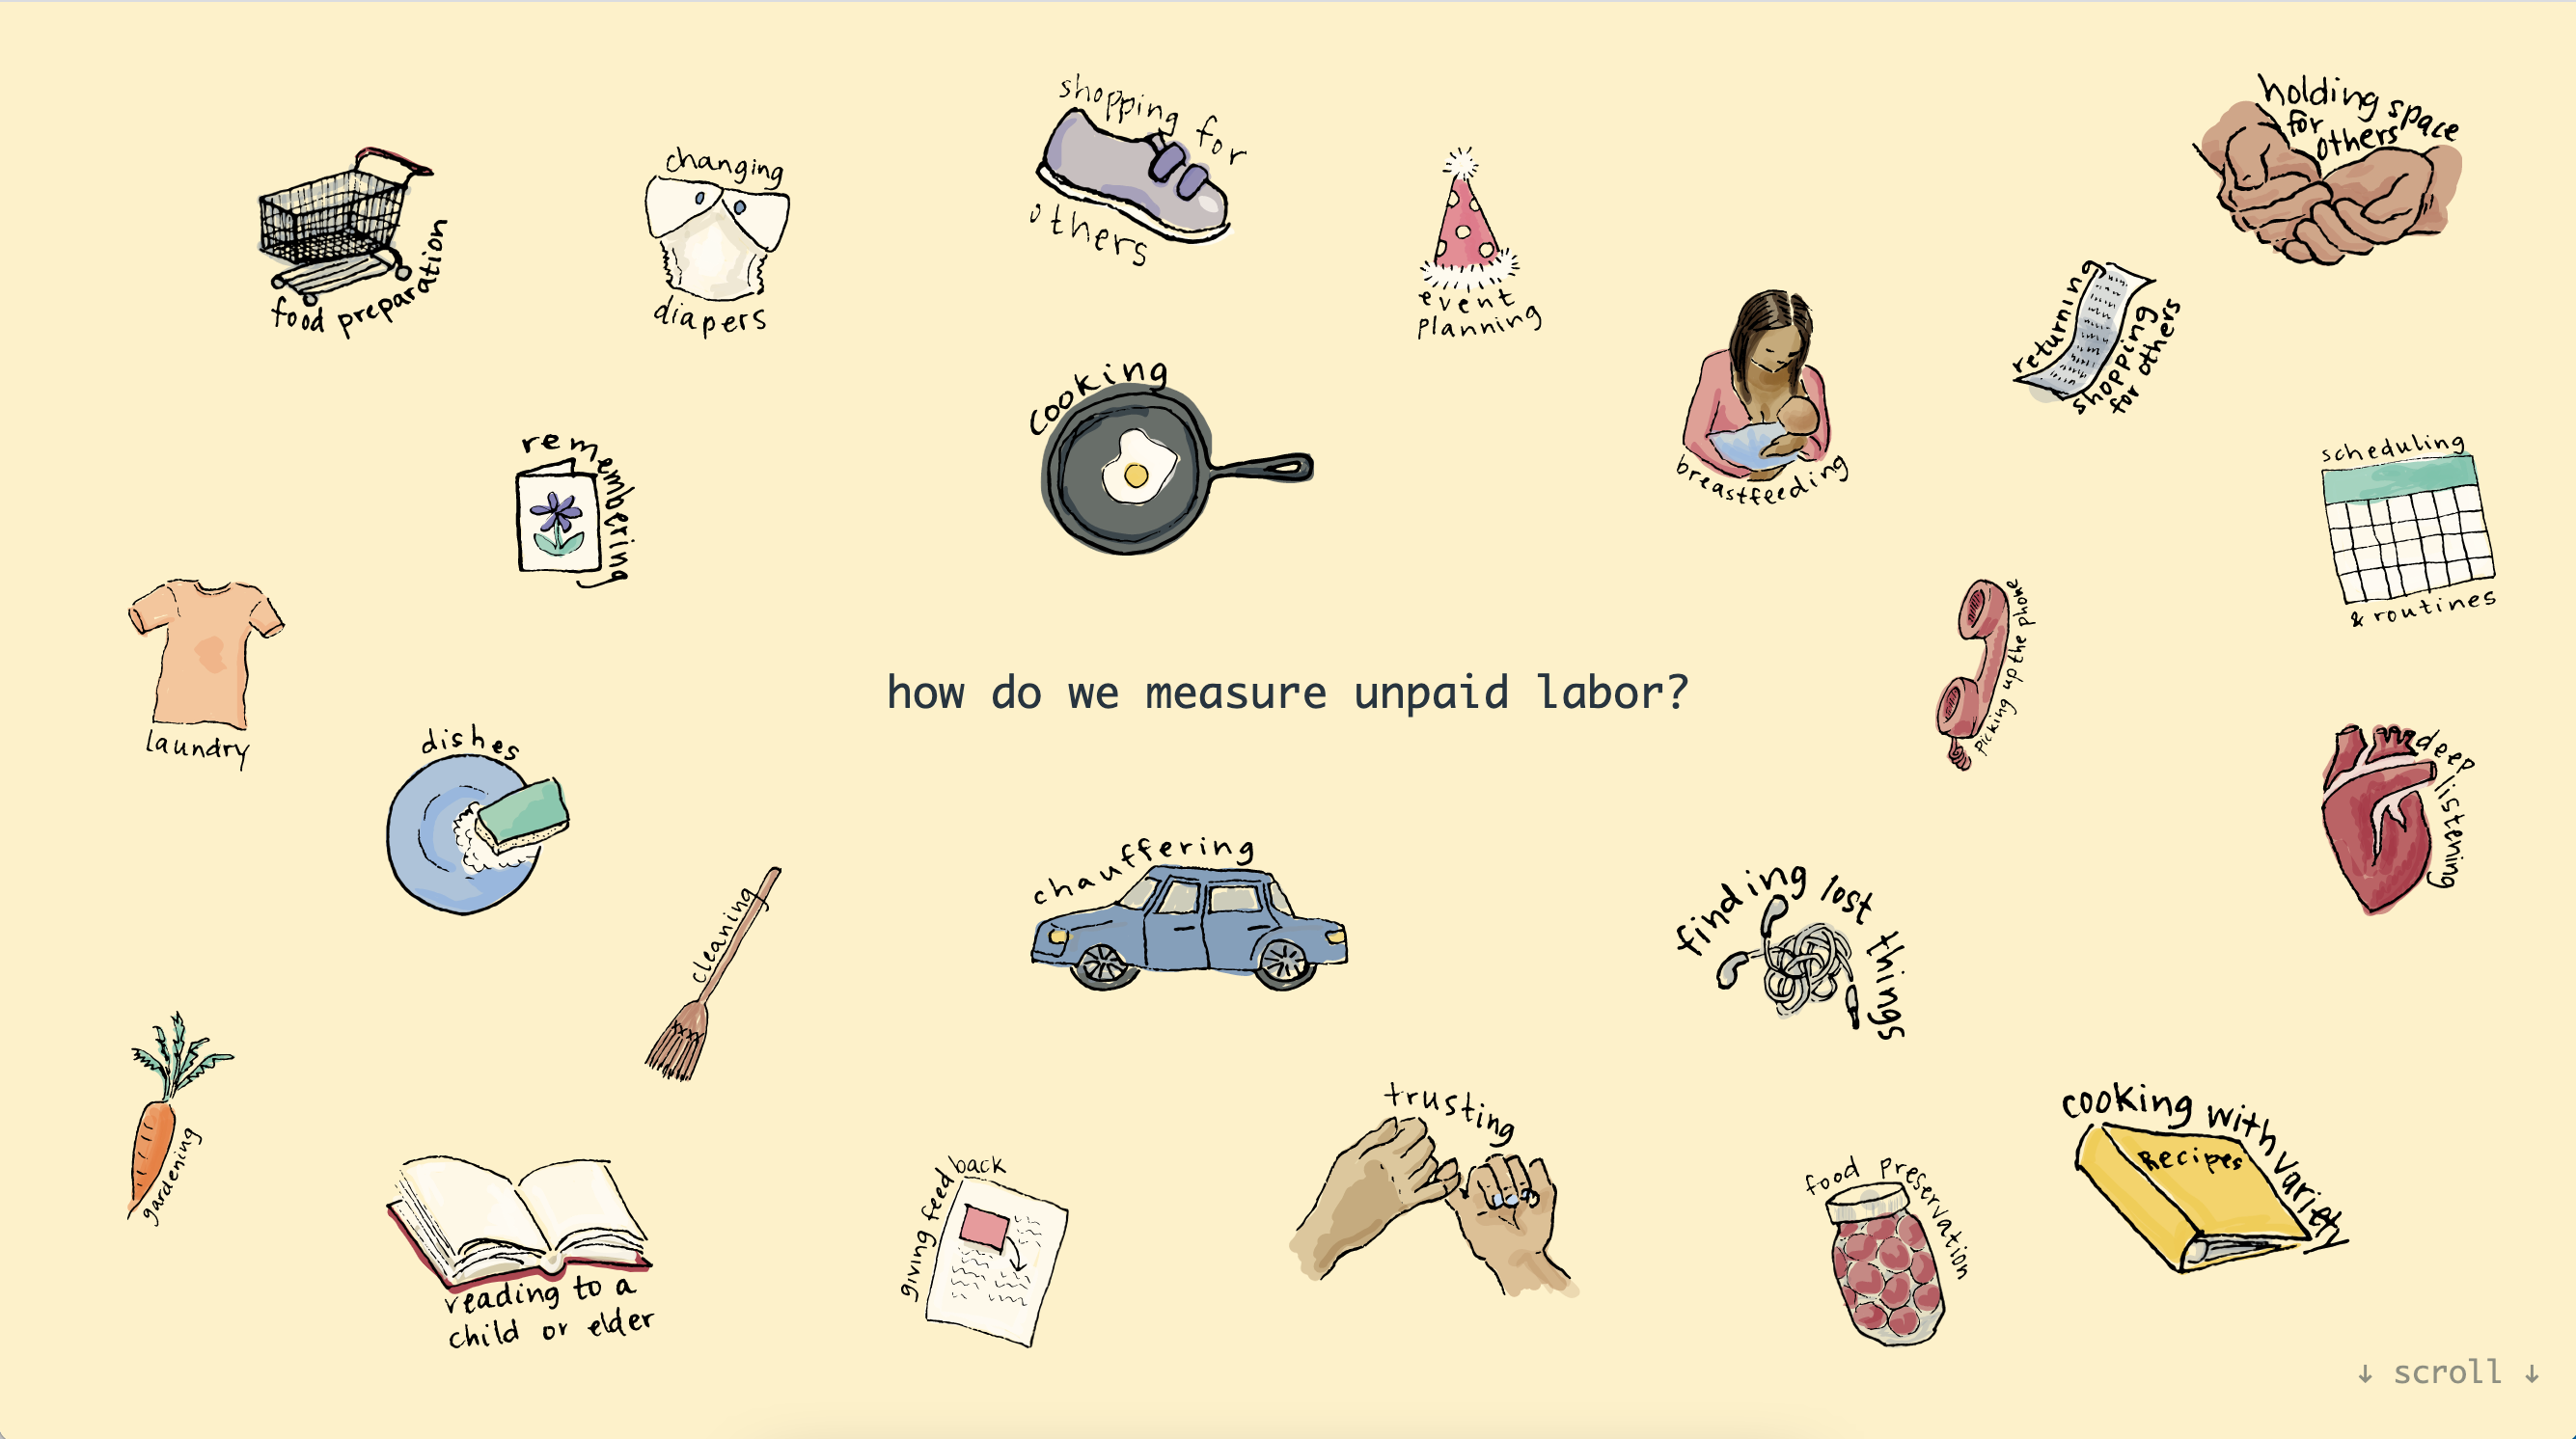 Hand-drawn icons of care actions like cooking, cleaning, and listening, scattered around the question "How do we measure unpaid labor?"